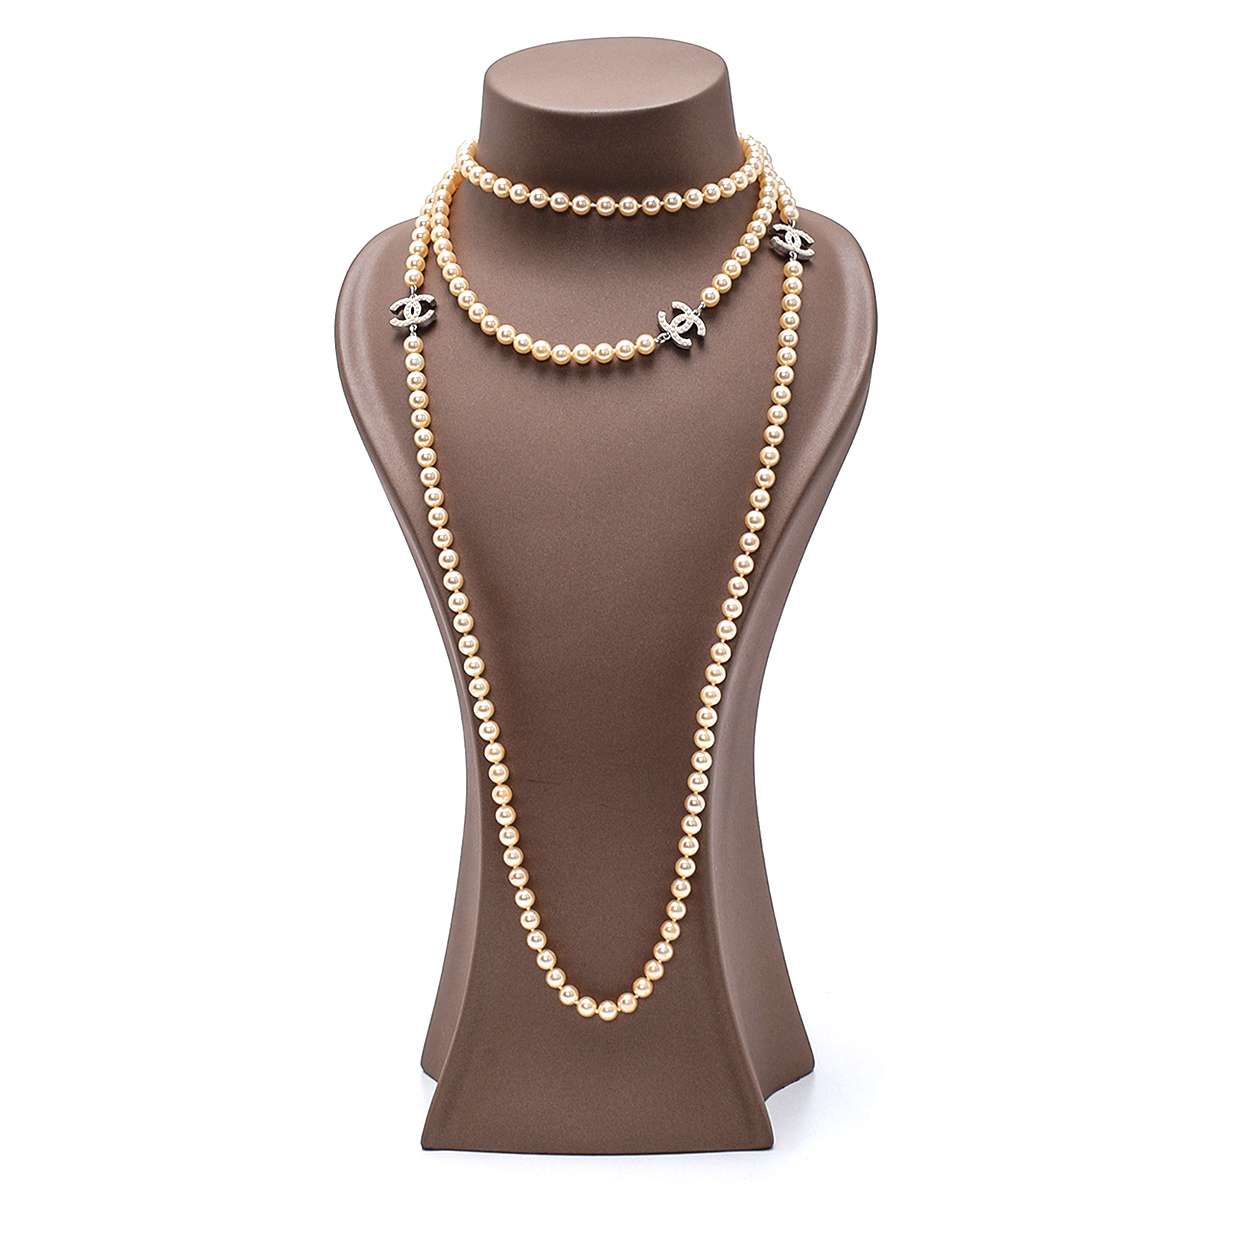 Chanel - Cream Pearl 3 CC Extra Long Necklace